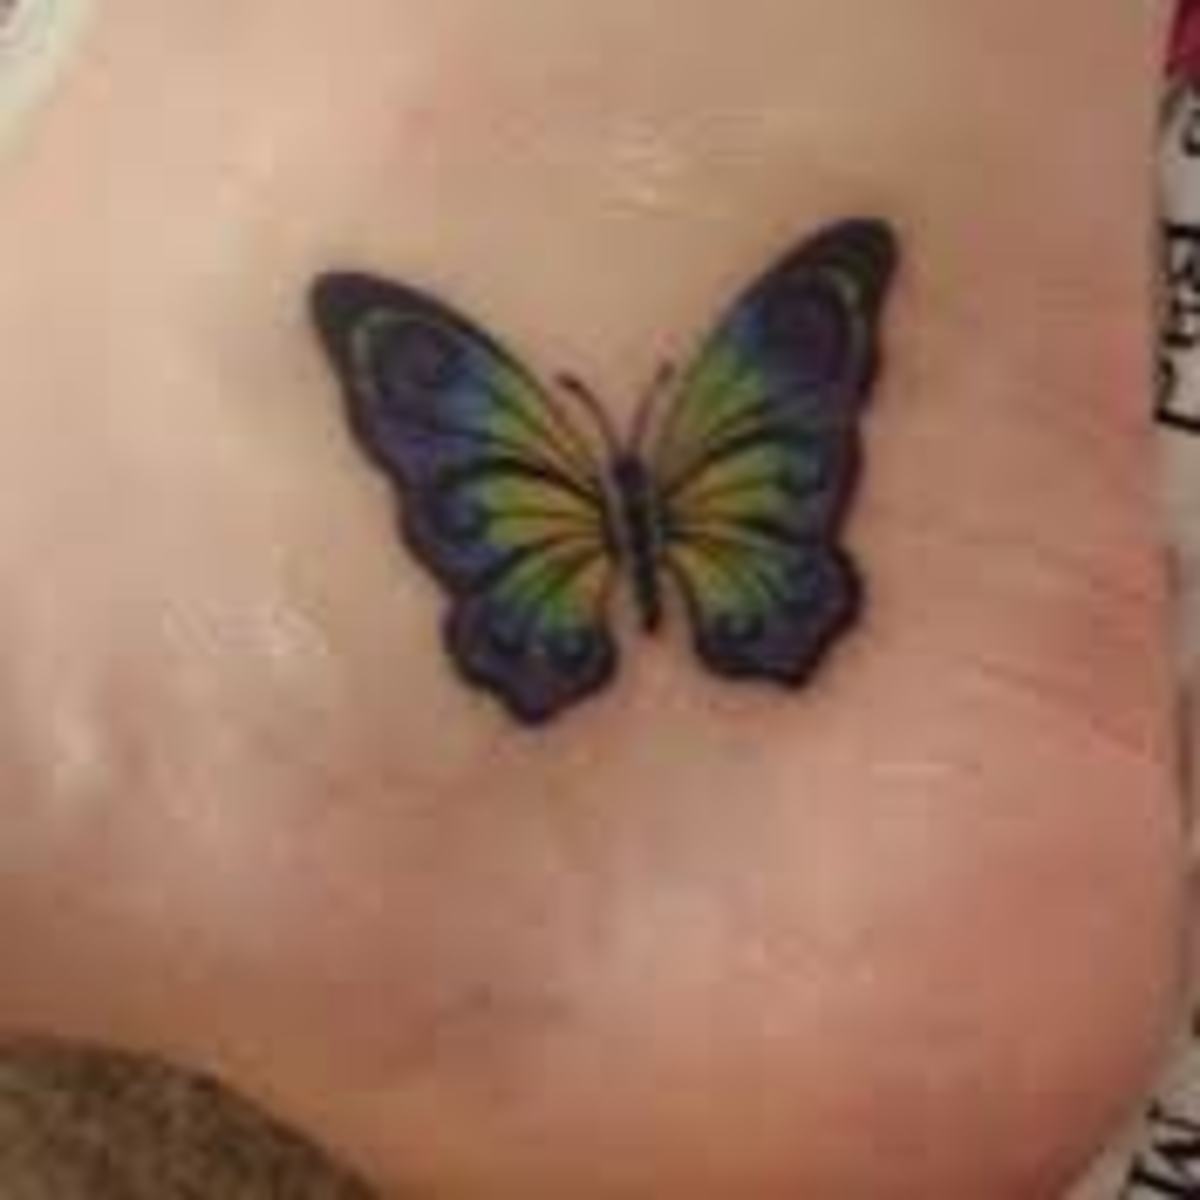 150 Attractive Butterfly Tattoos  Their Meanings